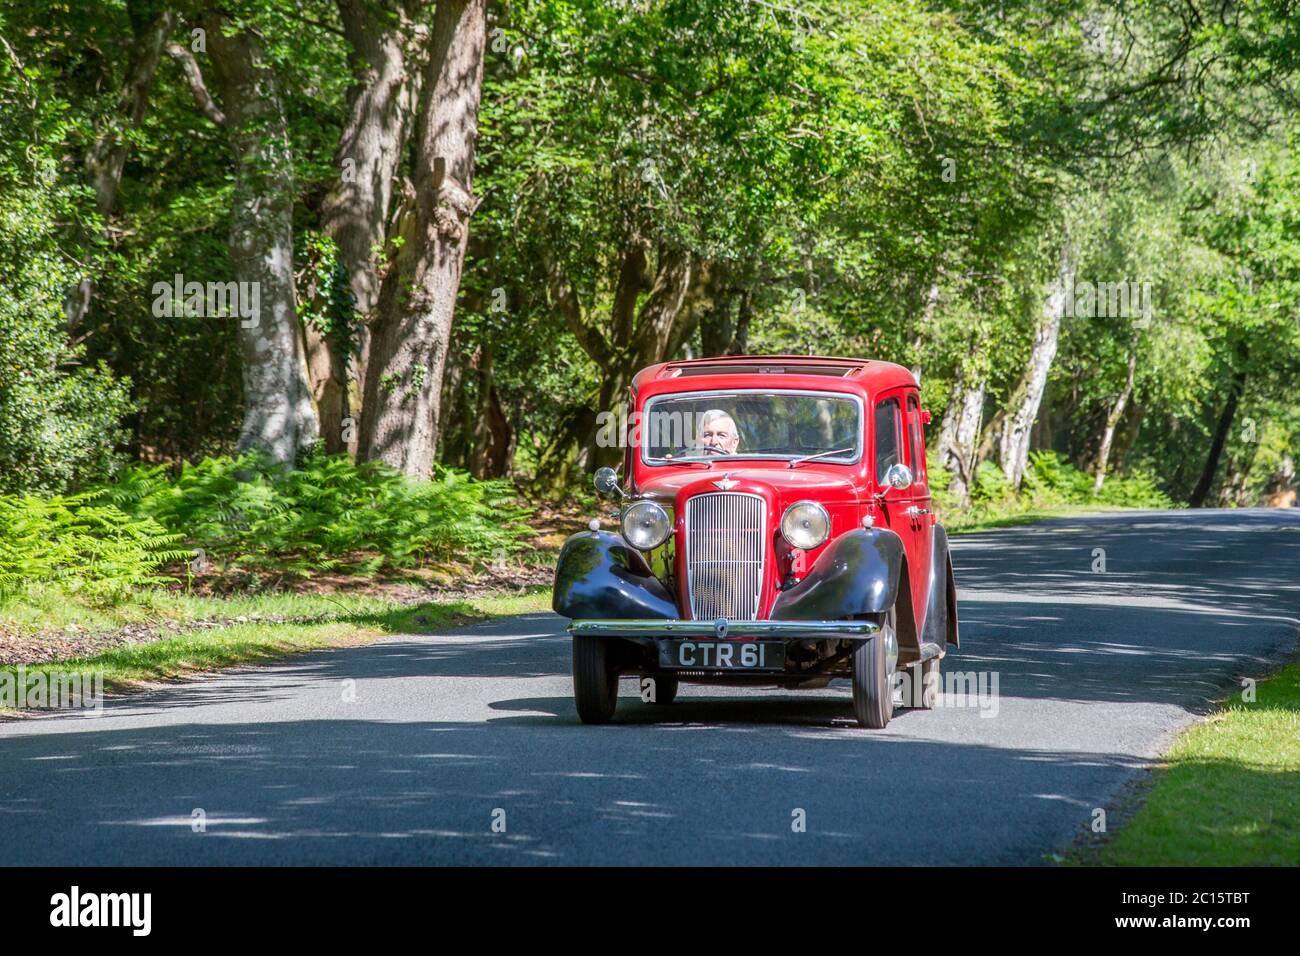 Classic Austin Seven Ruby Car driving through the New Forest National Park woodland scene, Hampshire, England Stock Photo